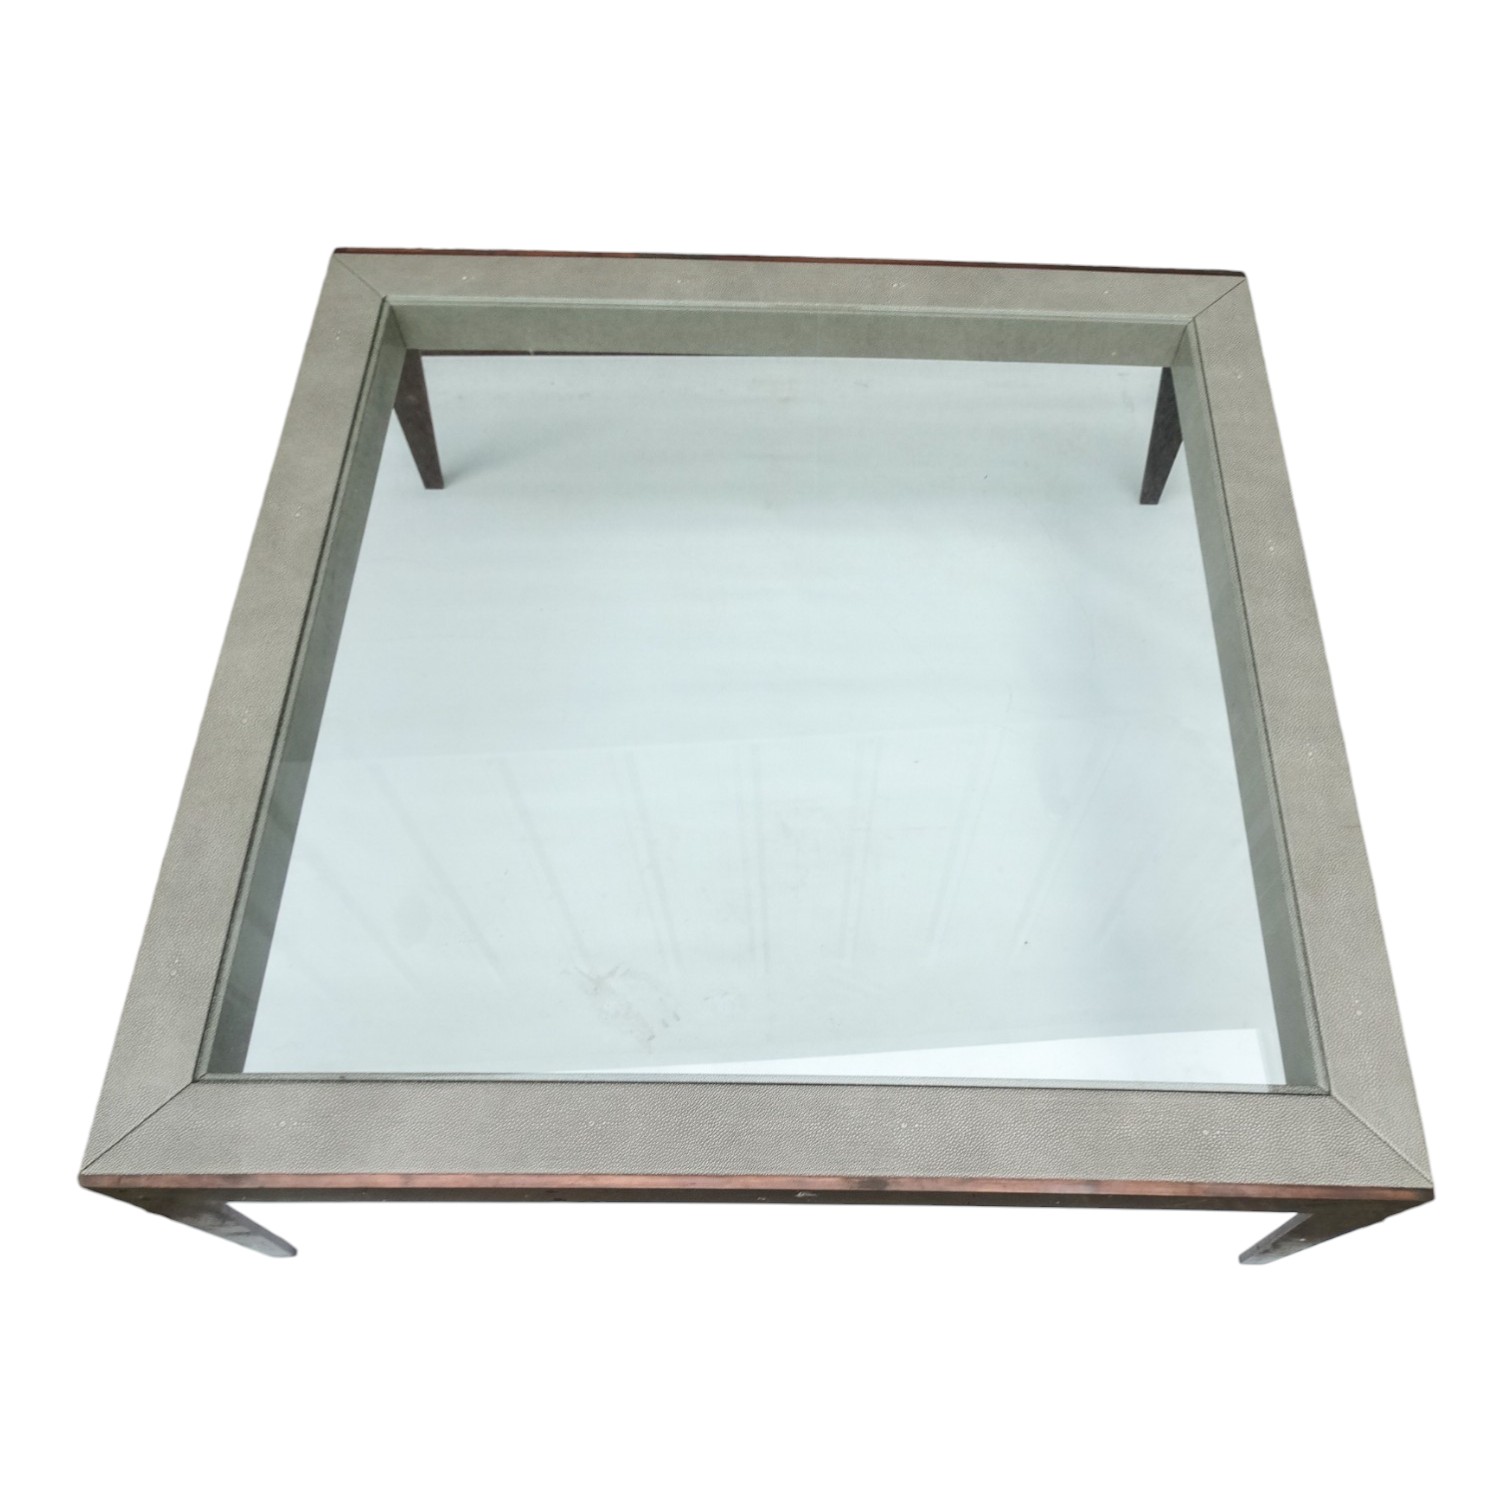 A contemporary glass and faux shagreen coffee table - square and raised on tapering profile bronze